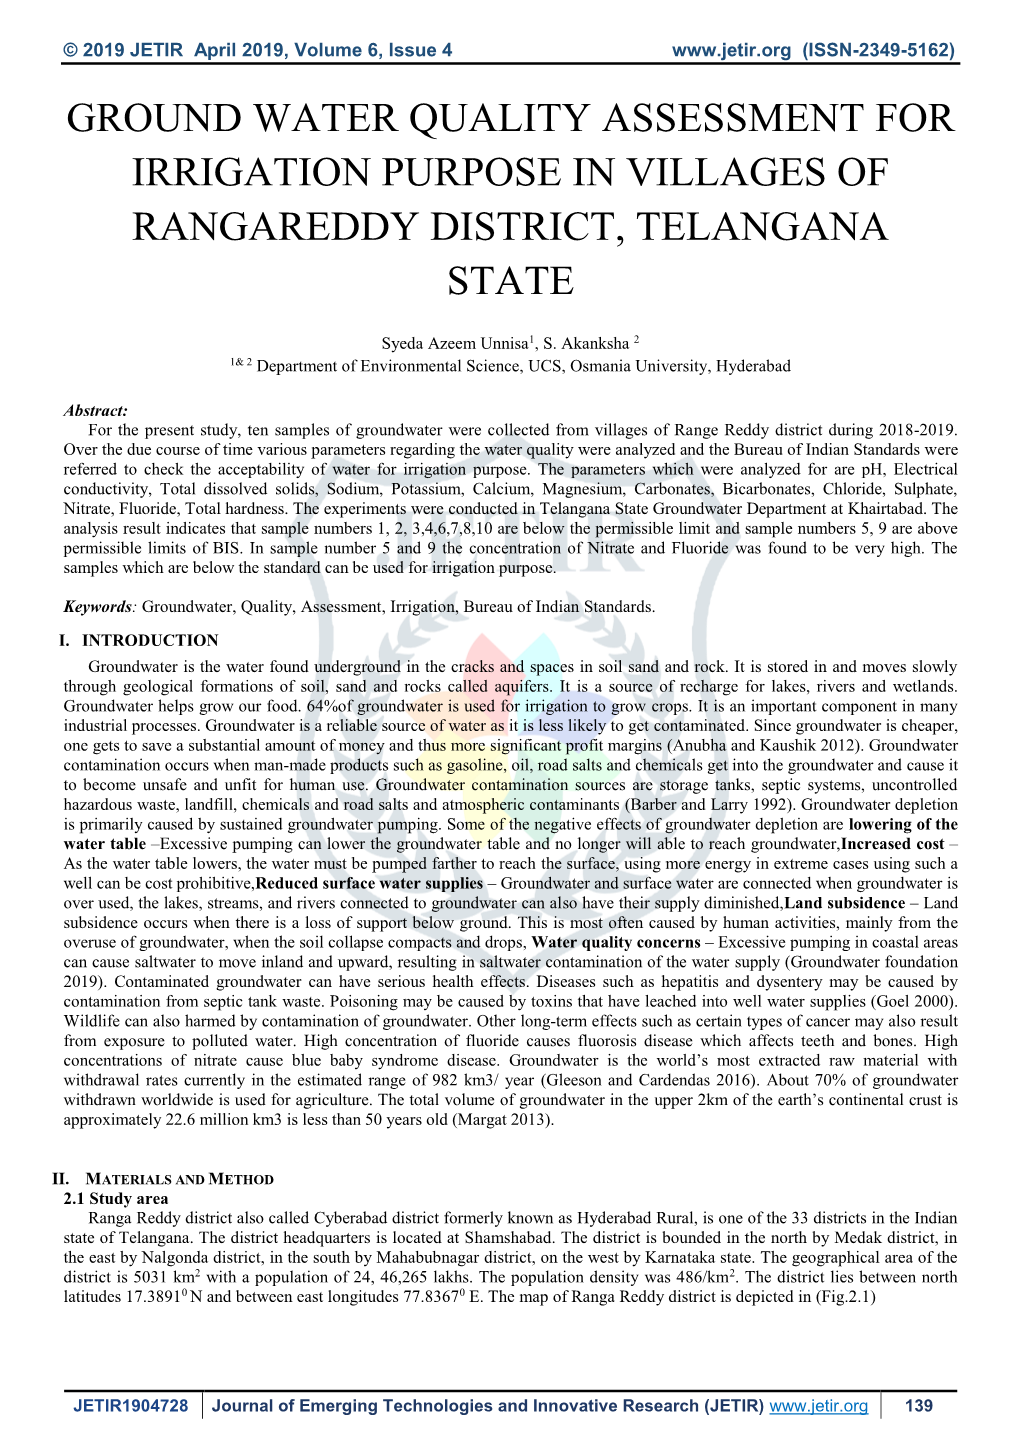 Ground Water Quality Assessment for Irrigation Purpose in Villages of Rangareddy District, Telangana State